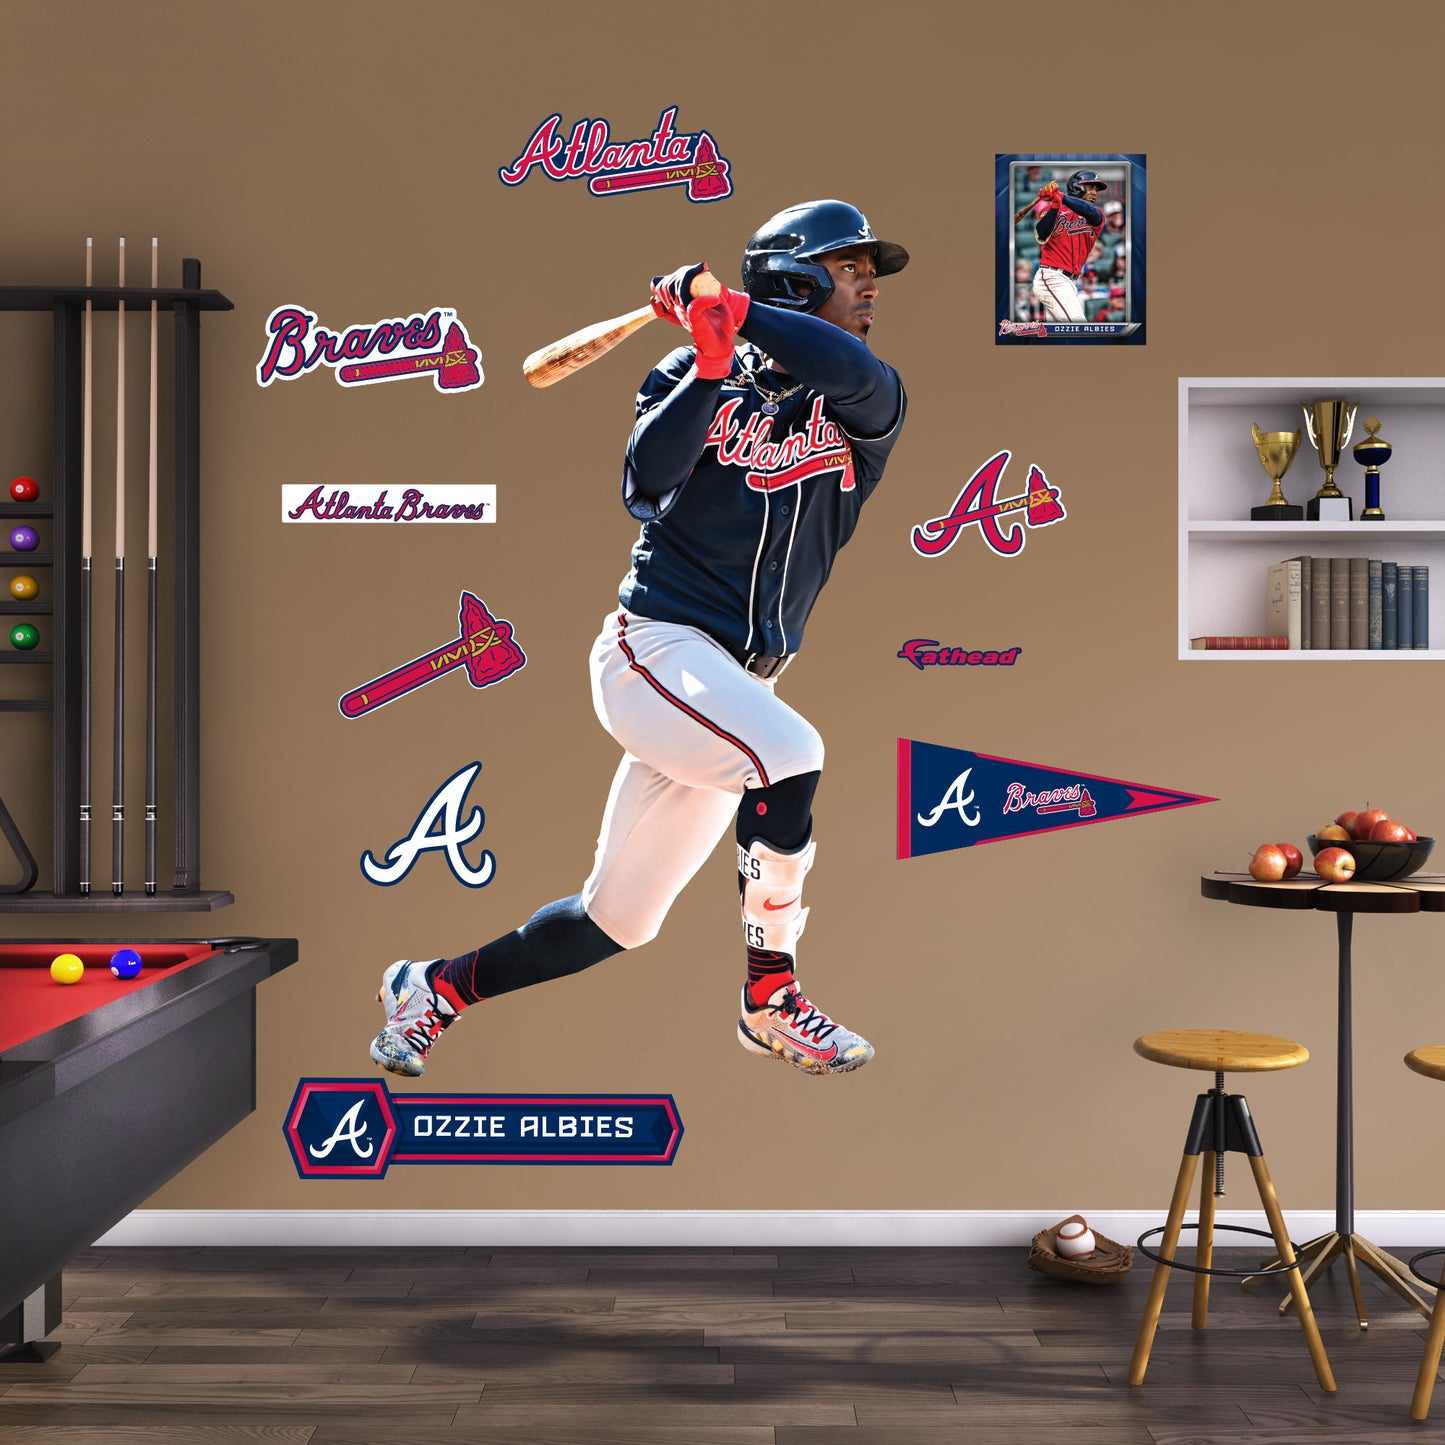 Atlanta Braves: Ozzie Albies         - Officially Licensed MLB Removable     Adhesive Decal